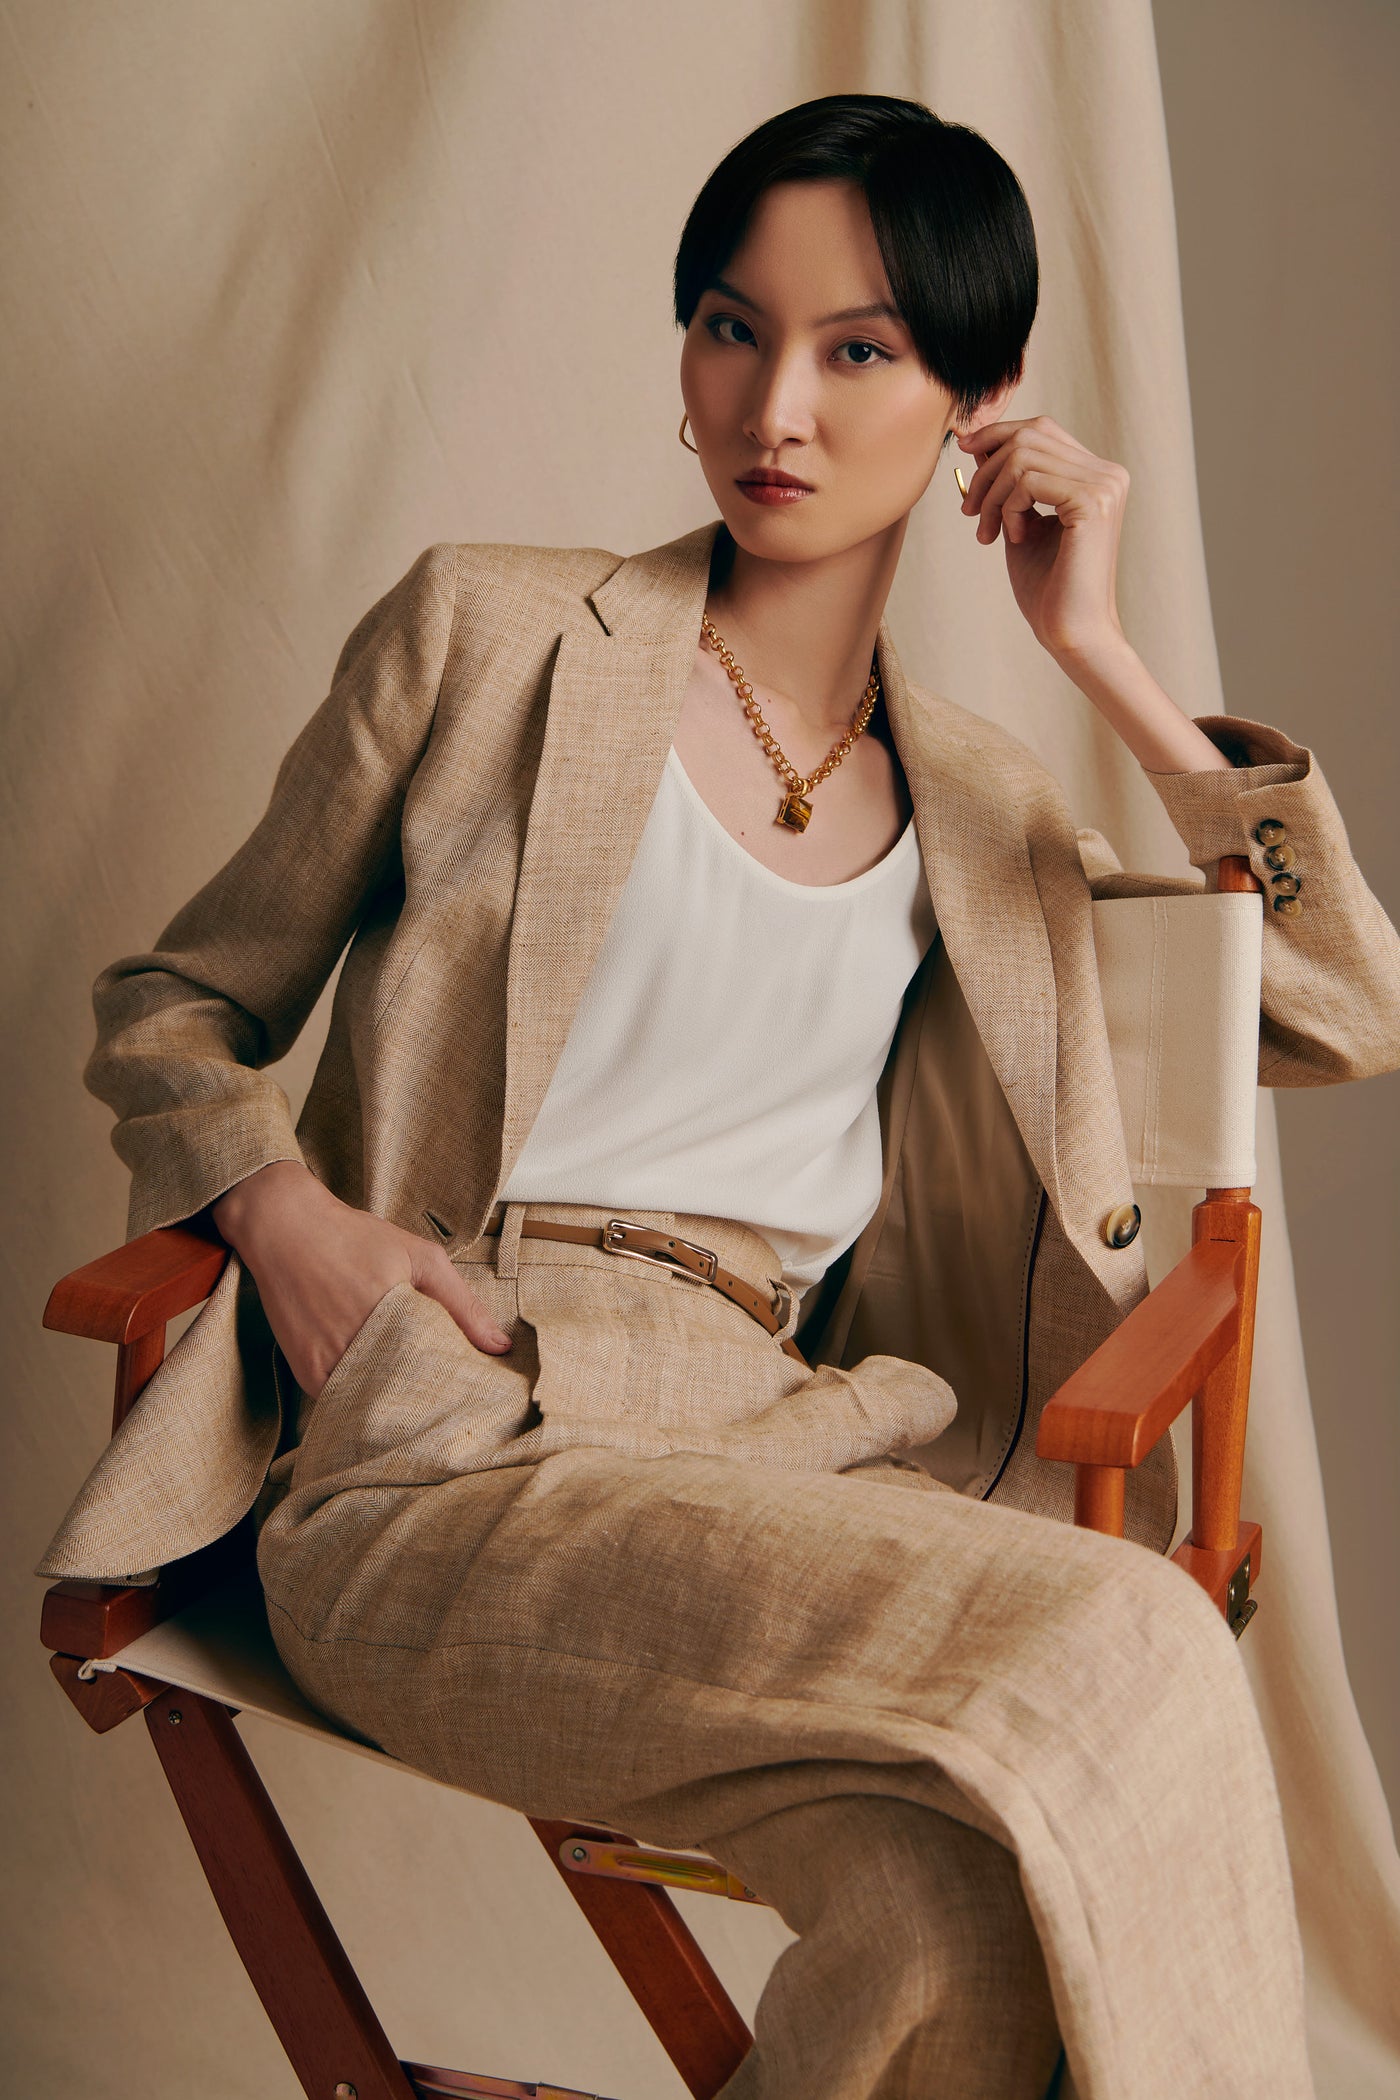 Max Mara Studio Linen Suit styled for Andrews shops' Safari style editorial